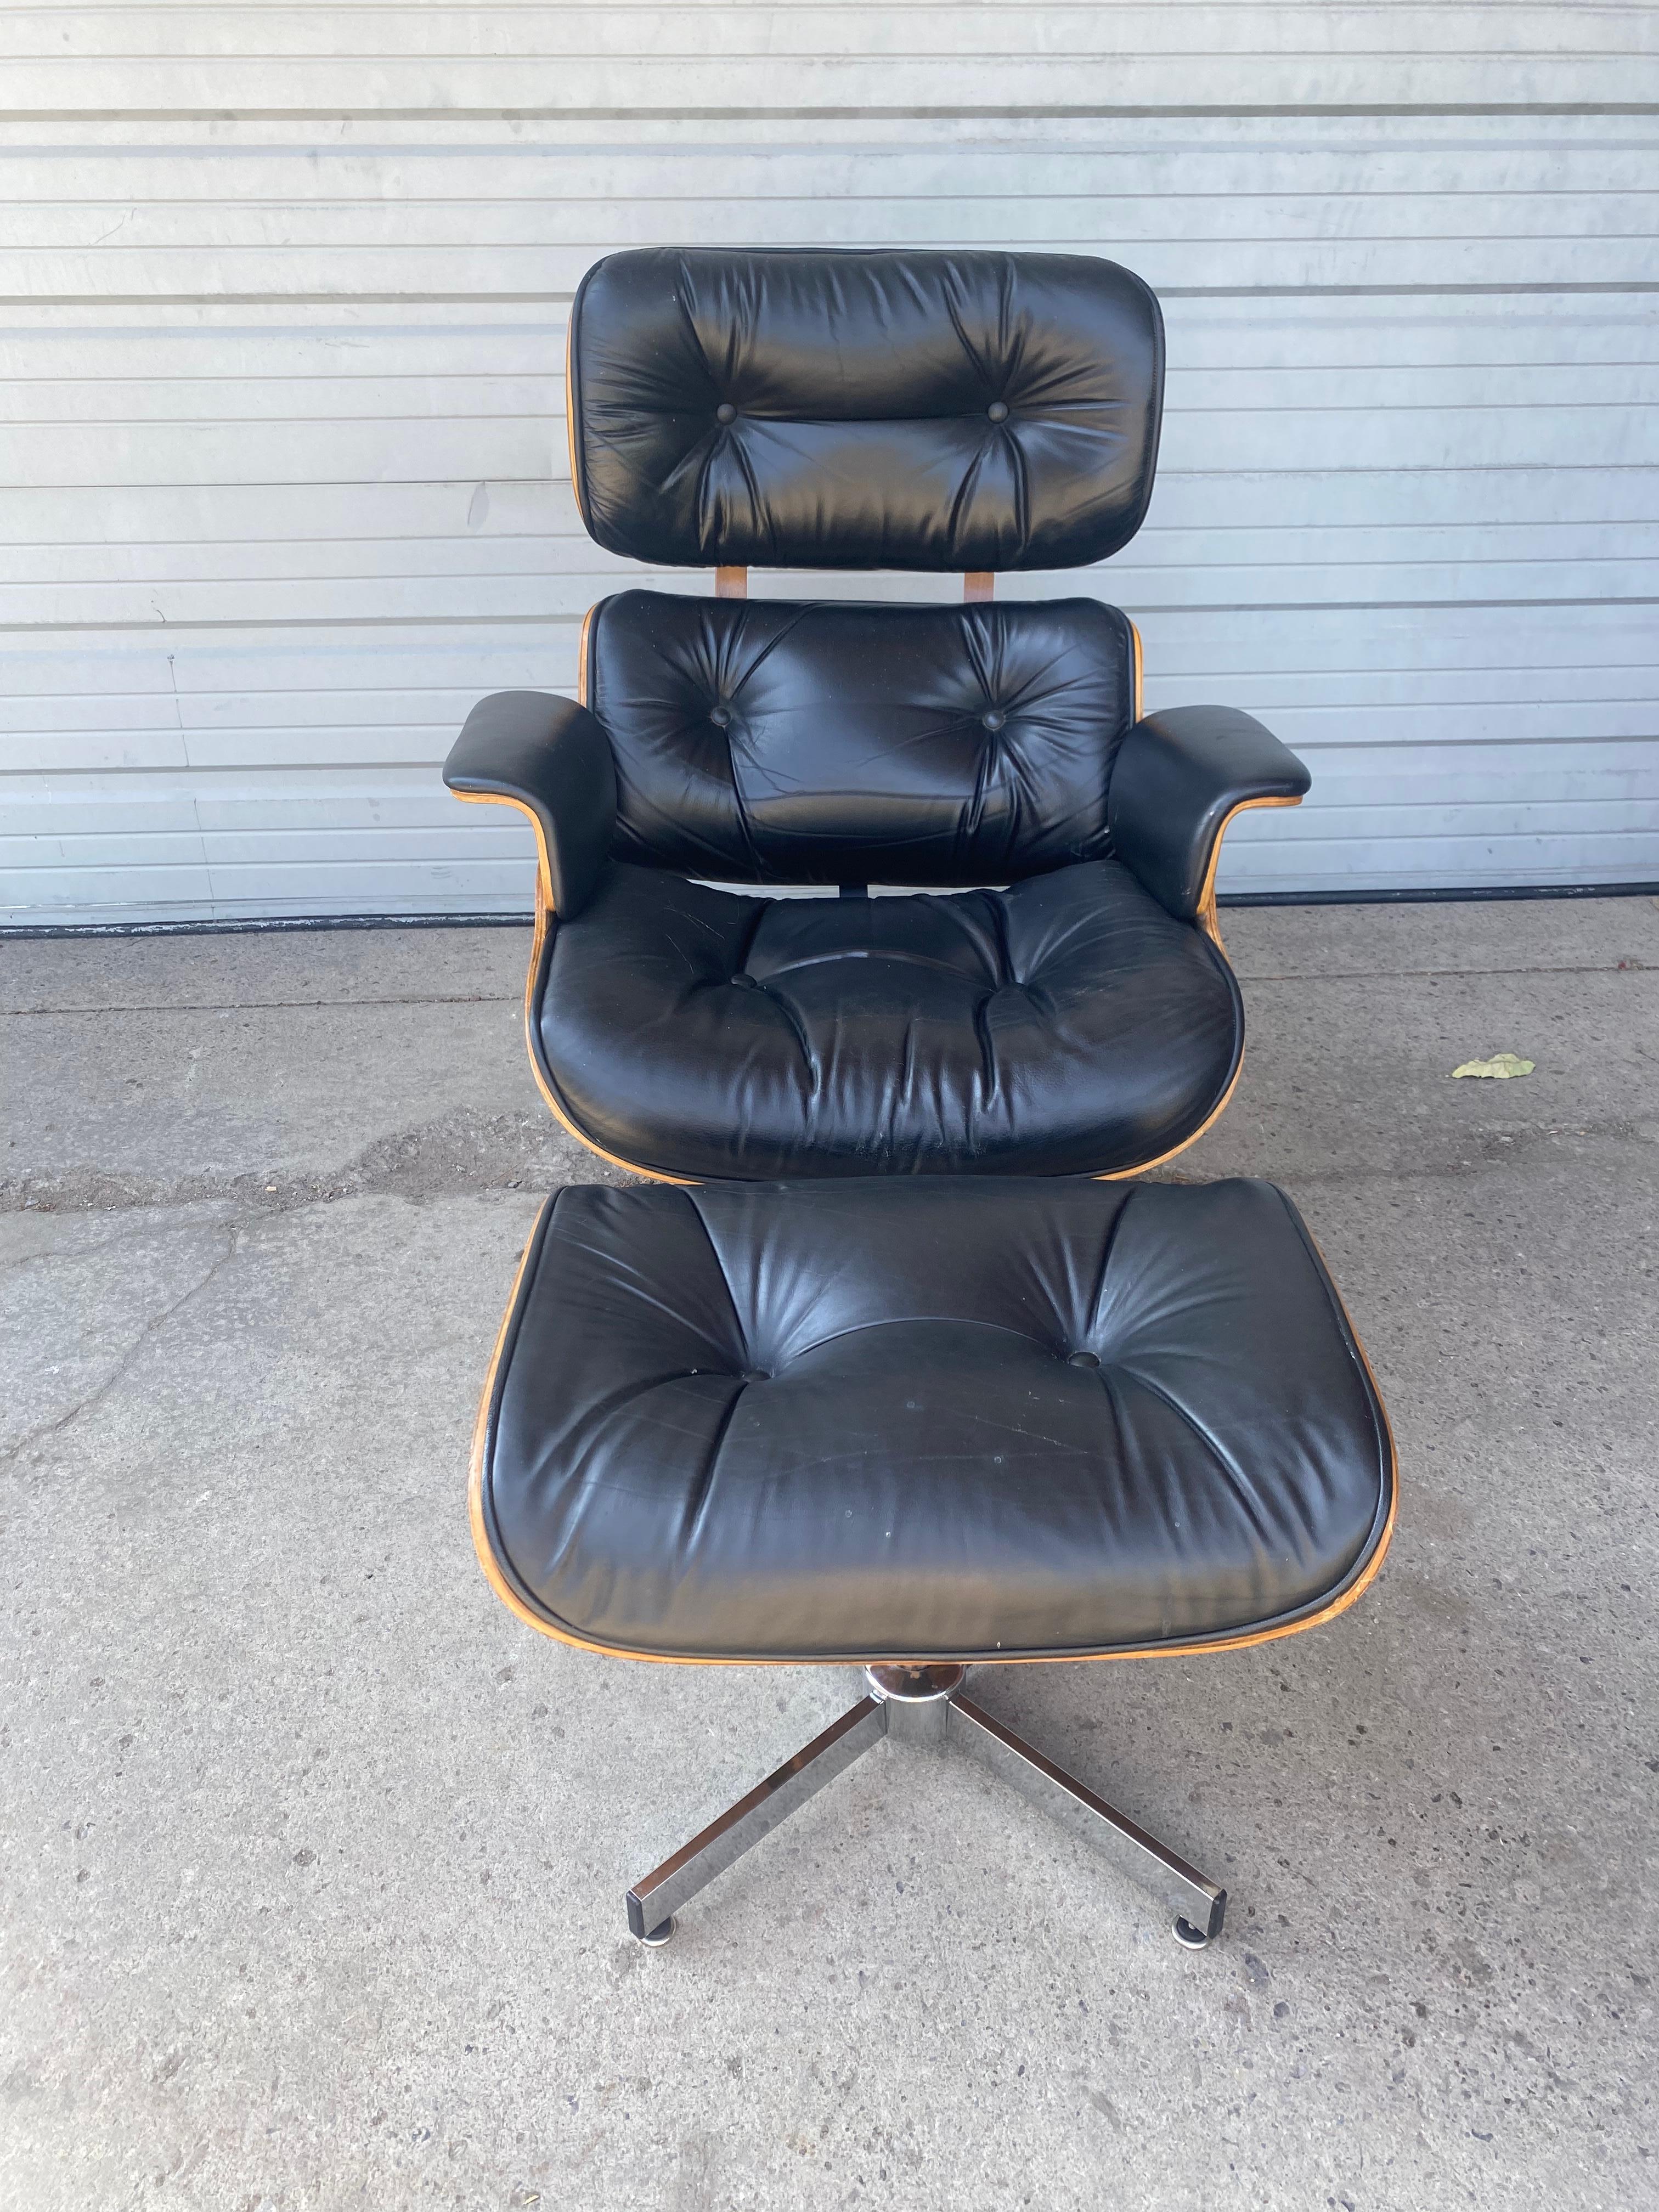 American Eames Style Lounge Chair and Ottoman, Leather, Plycraft, Classic Modernist